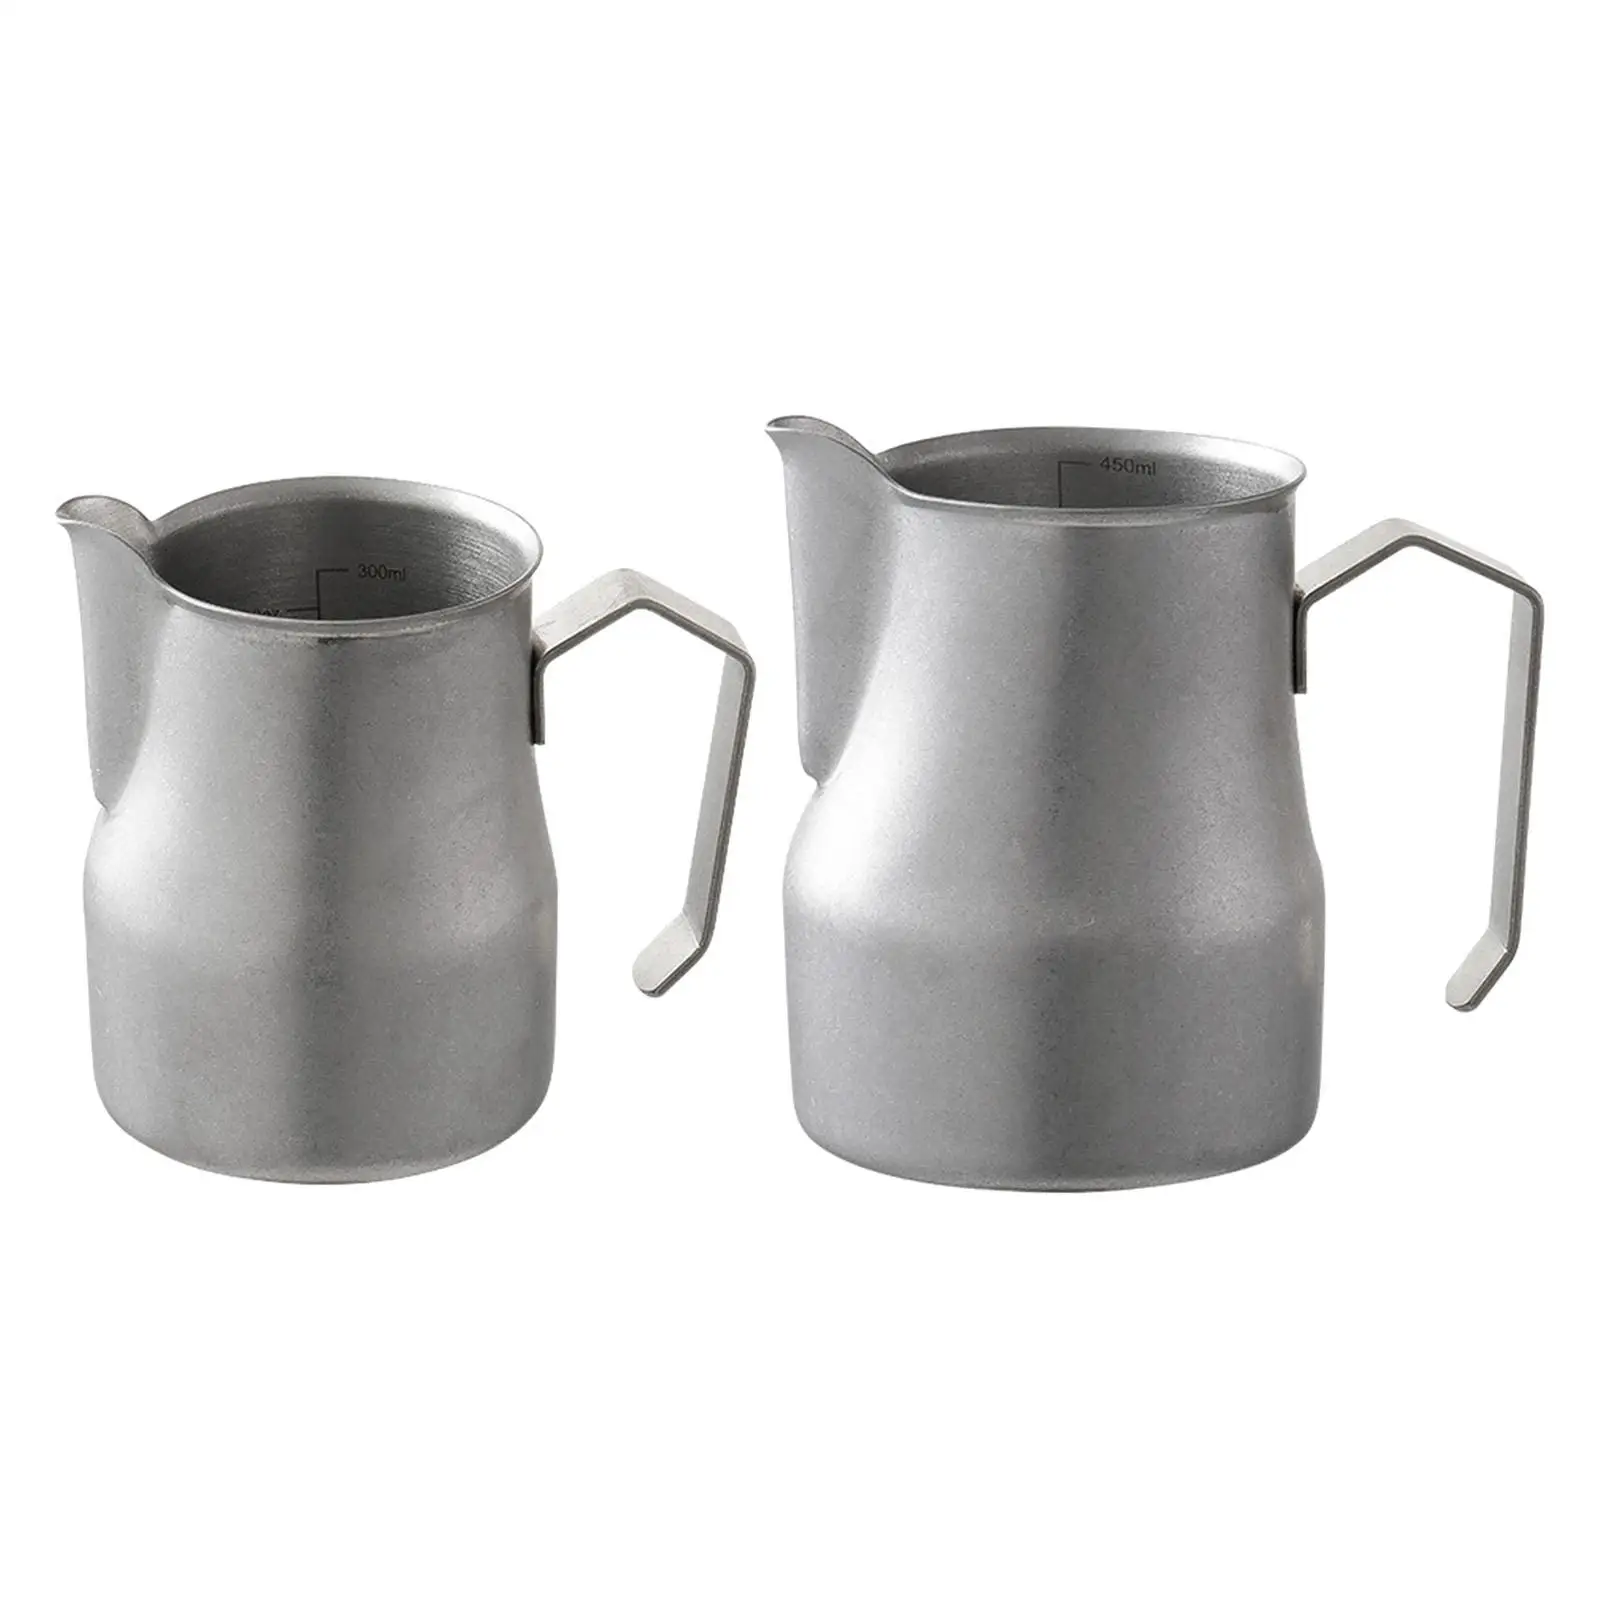 Stainless Steel Milk Frothing Pitcher Jug latte Art Cup Cappuccino Pitcher Pouring Jug for Coffee Matcha Home Restaurant